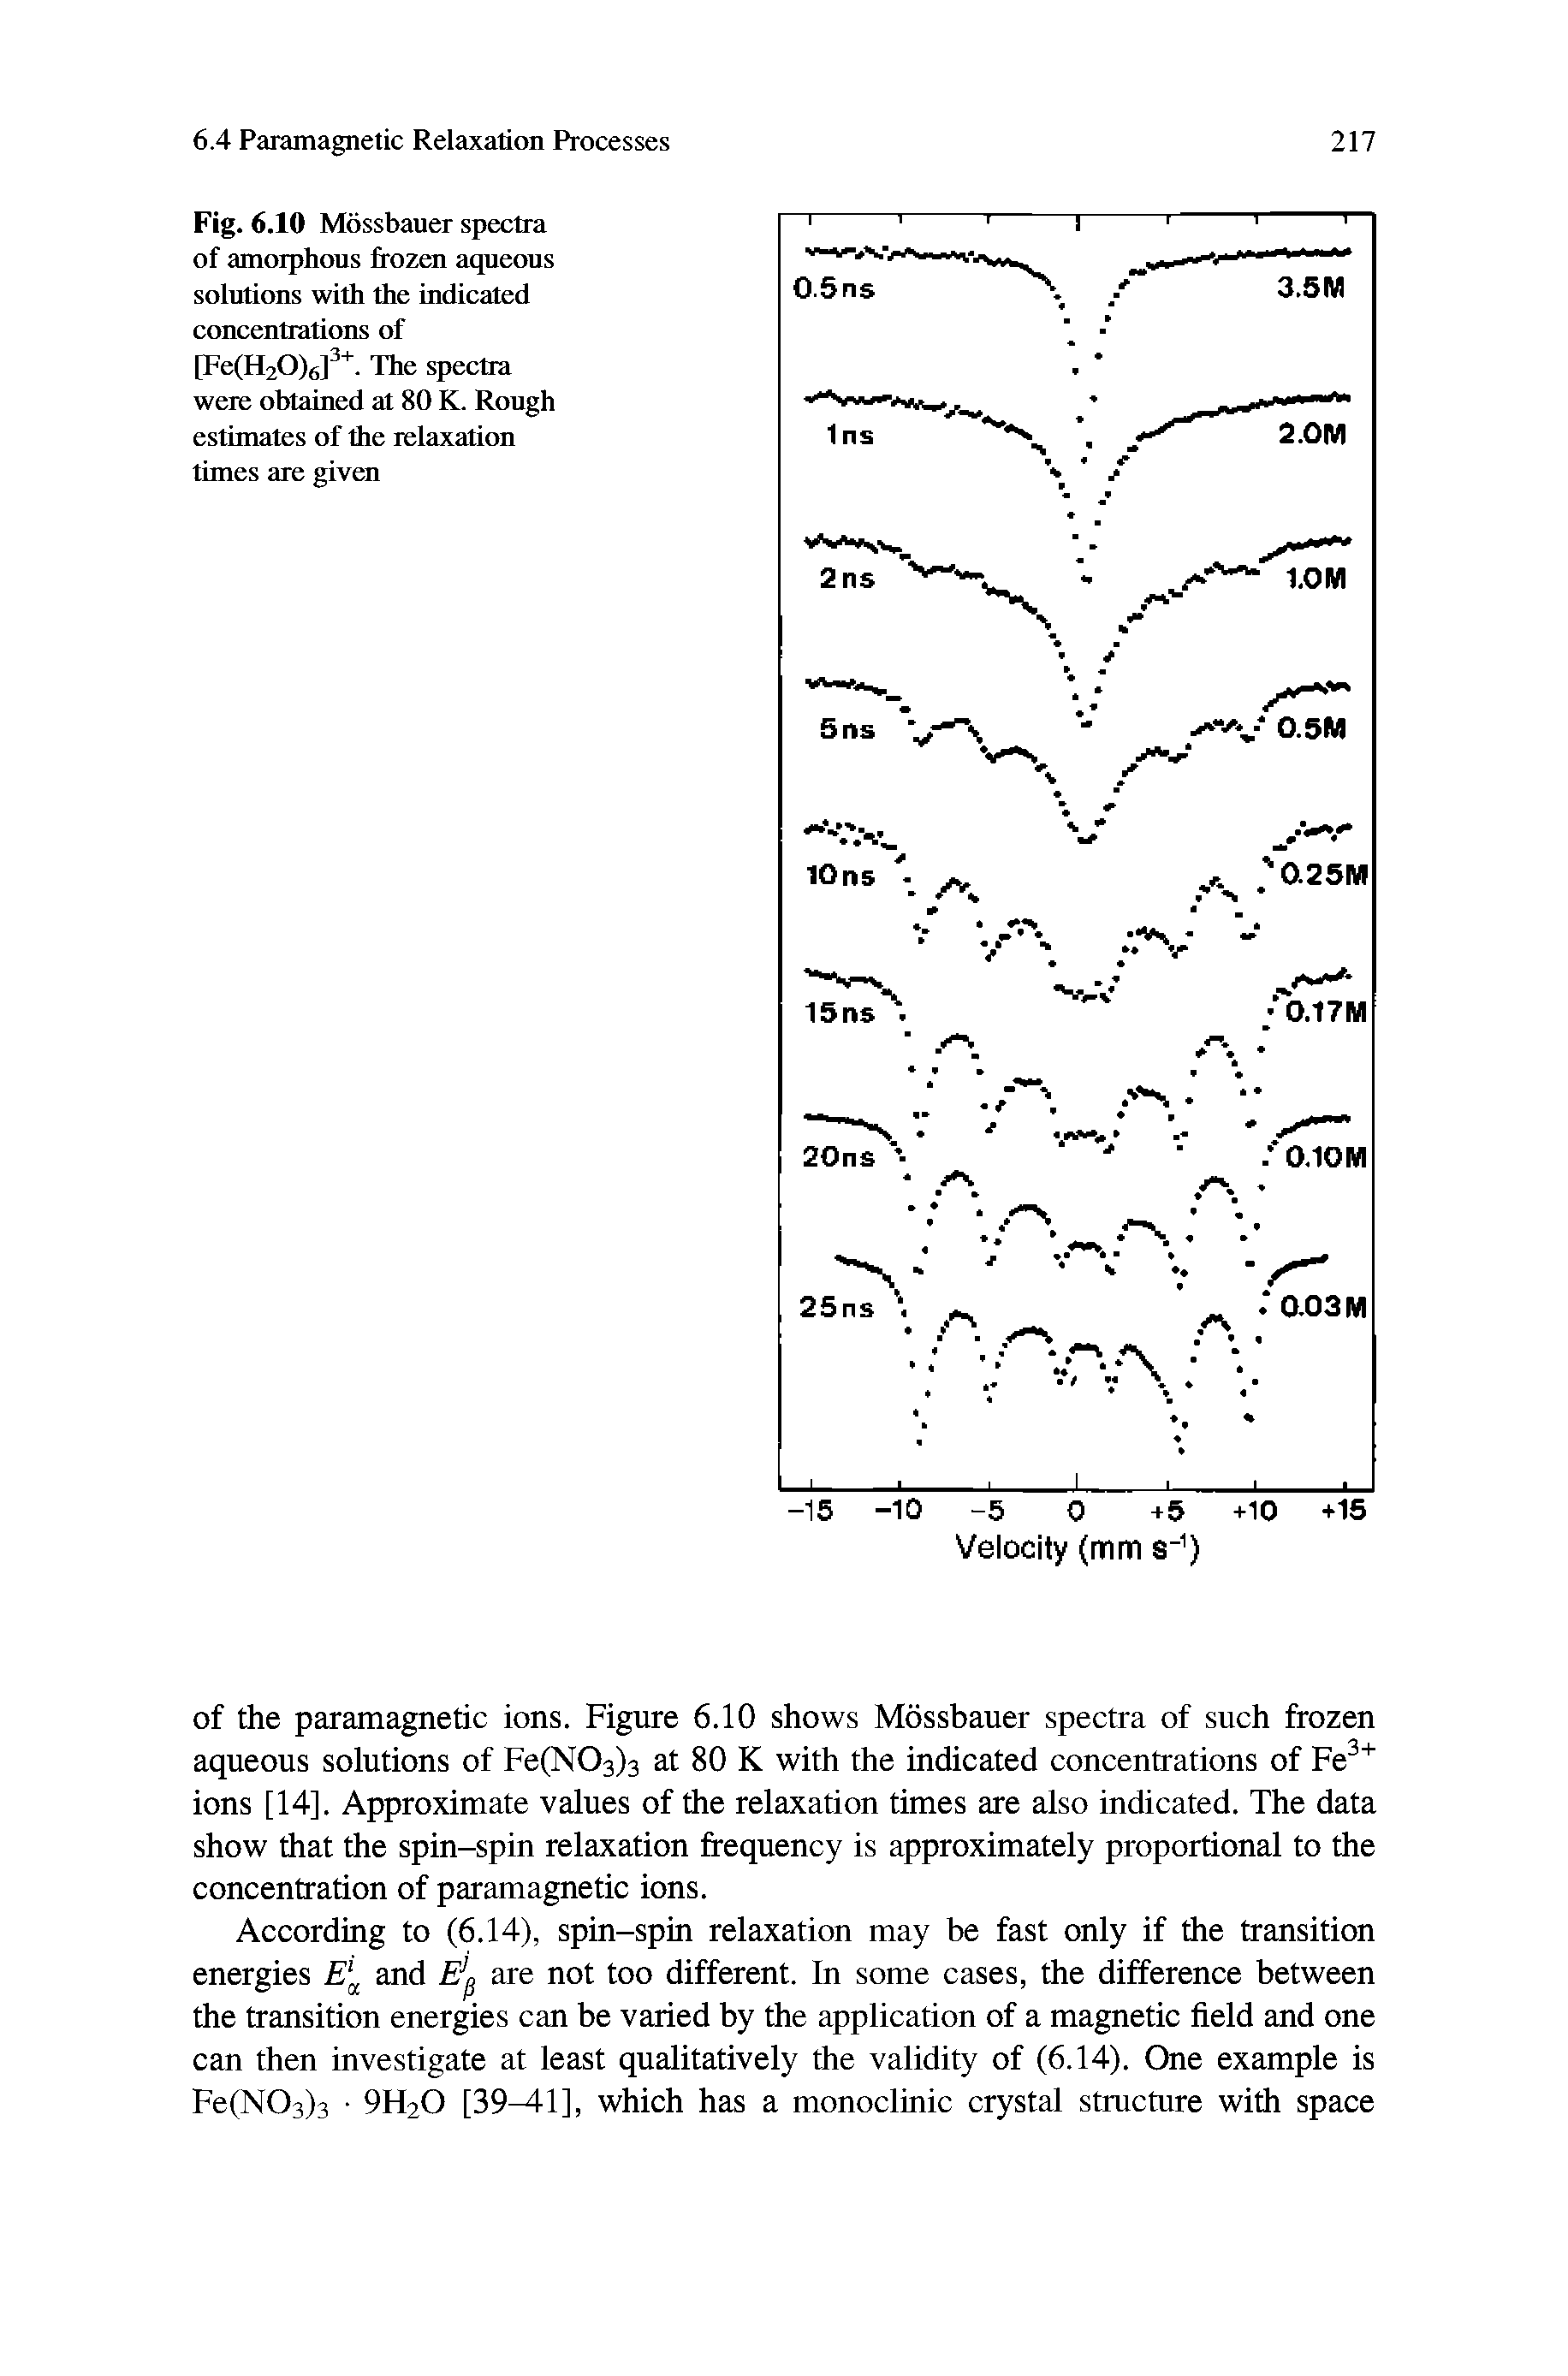 Fig. 6.10 Mossbauer spectra of amorphous frozen aqueous solutions with the indicated concentrations of [Fe(H20)6]. The spectra were obtained at 80 K. Rough estimates of the relaxation times are given...